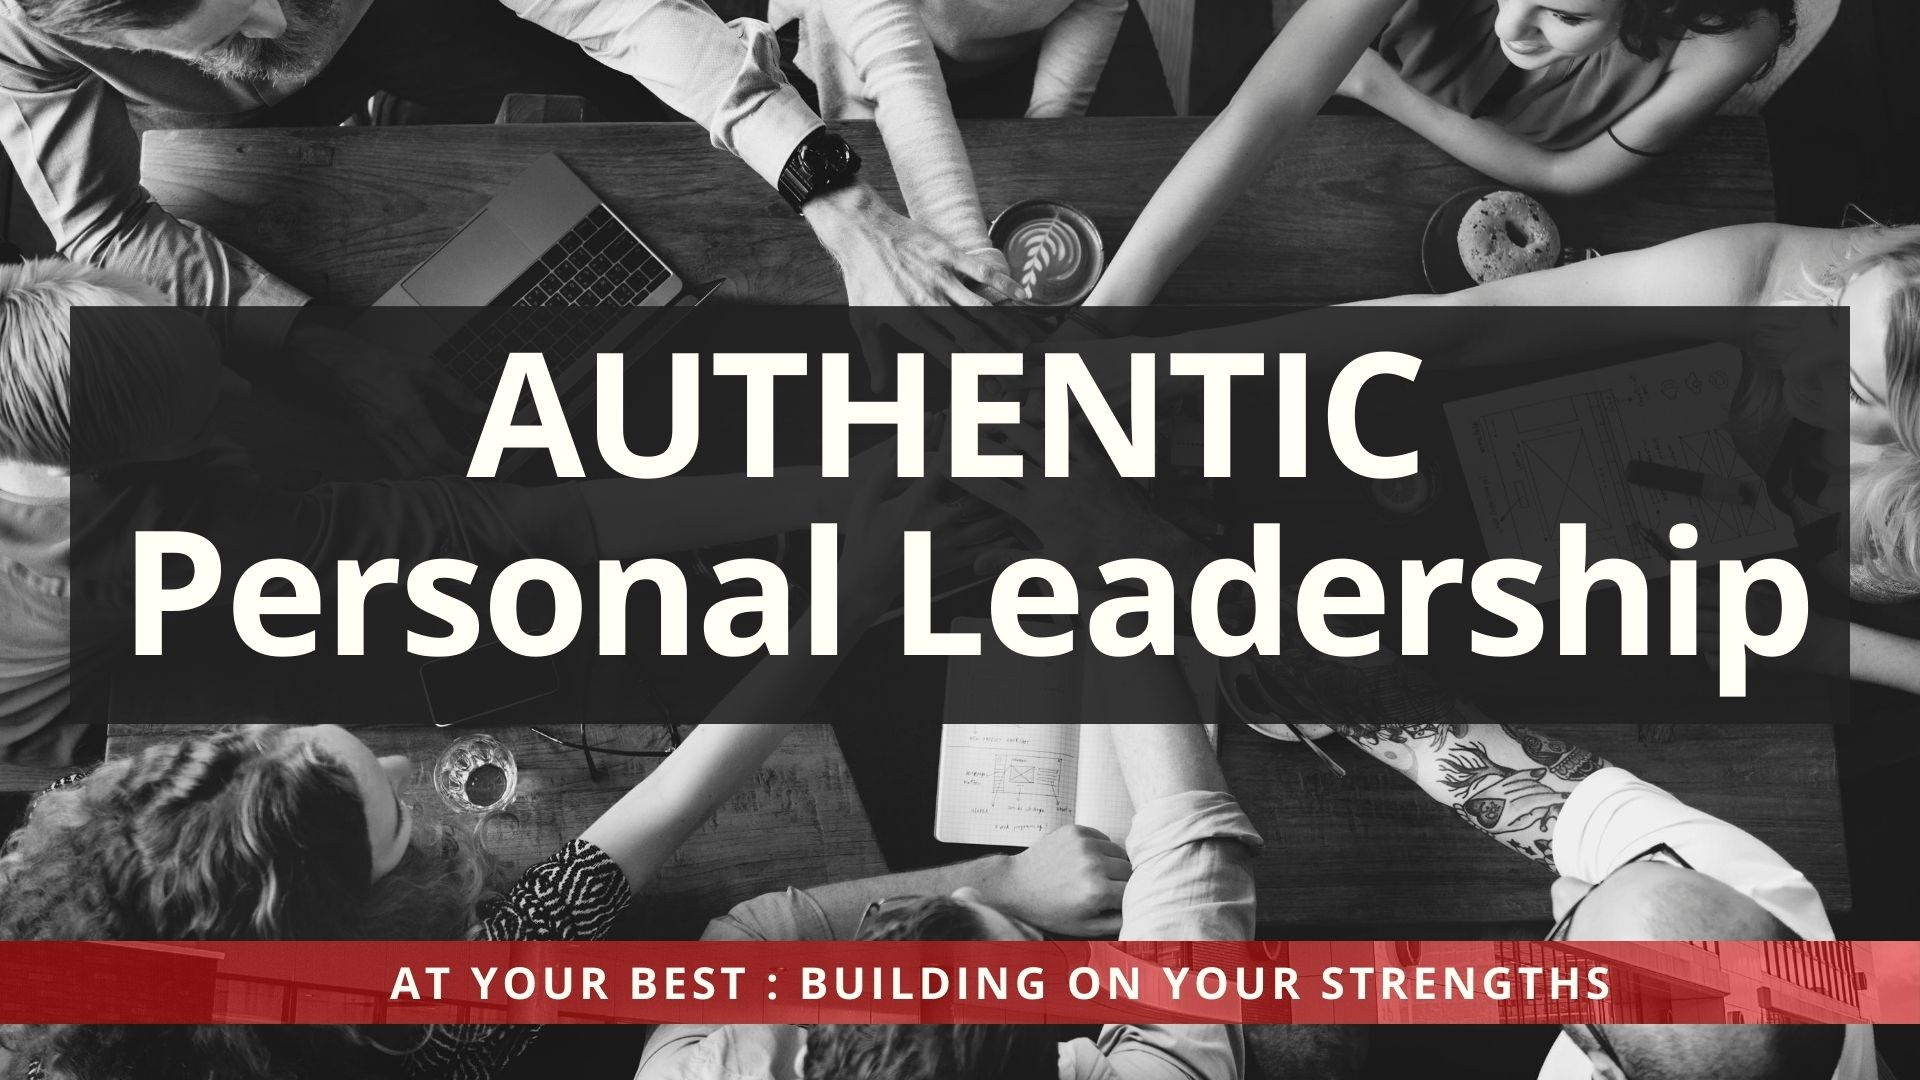 Authentic personal leadership